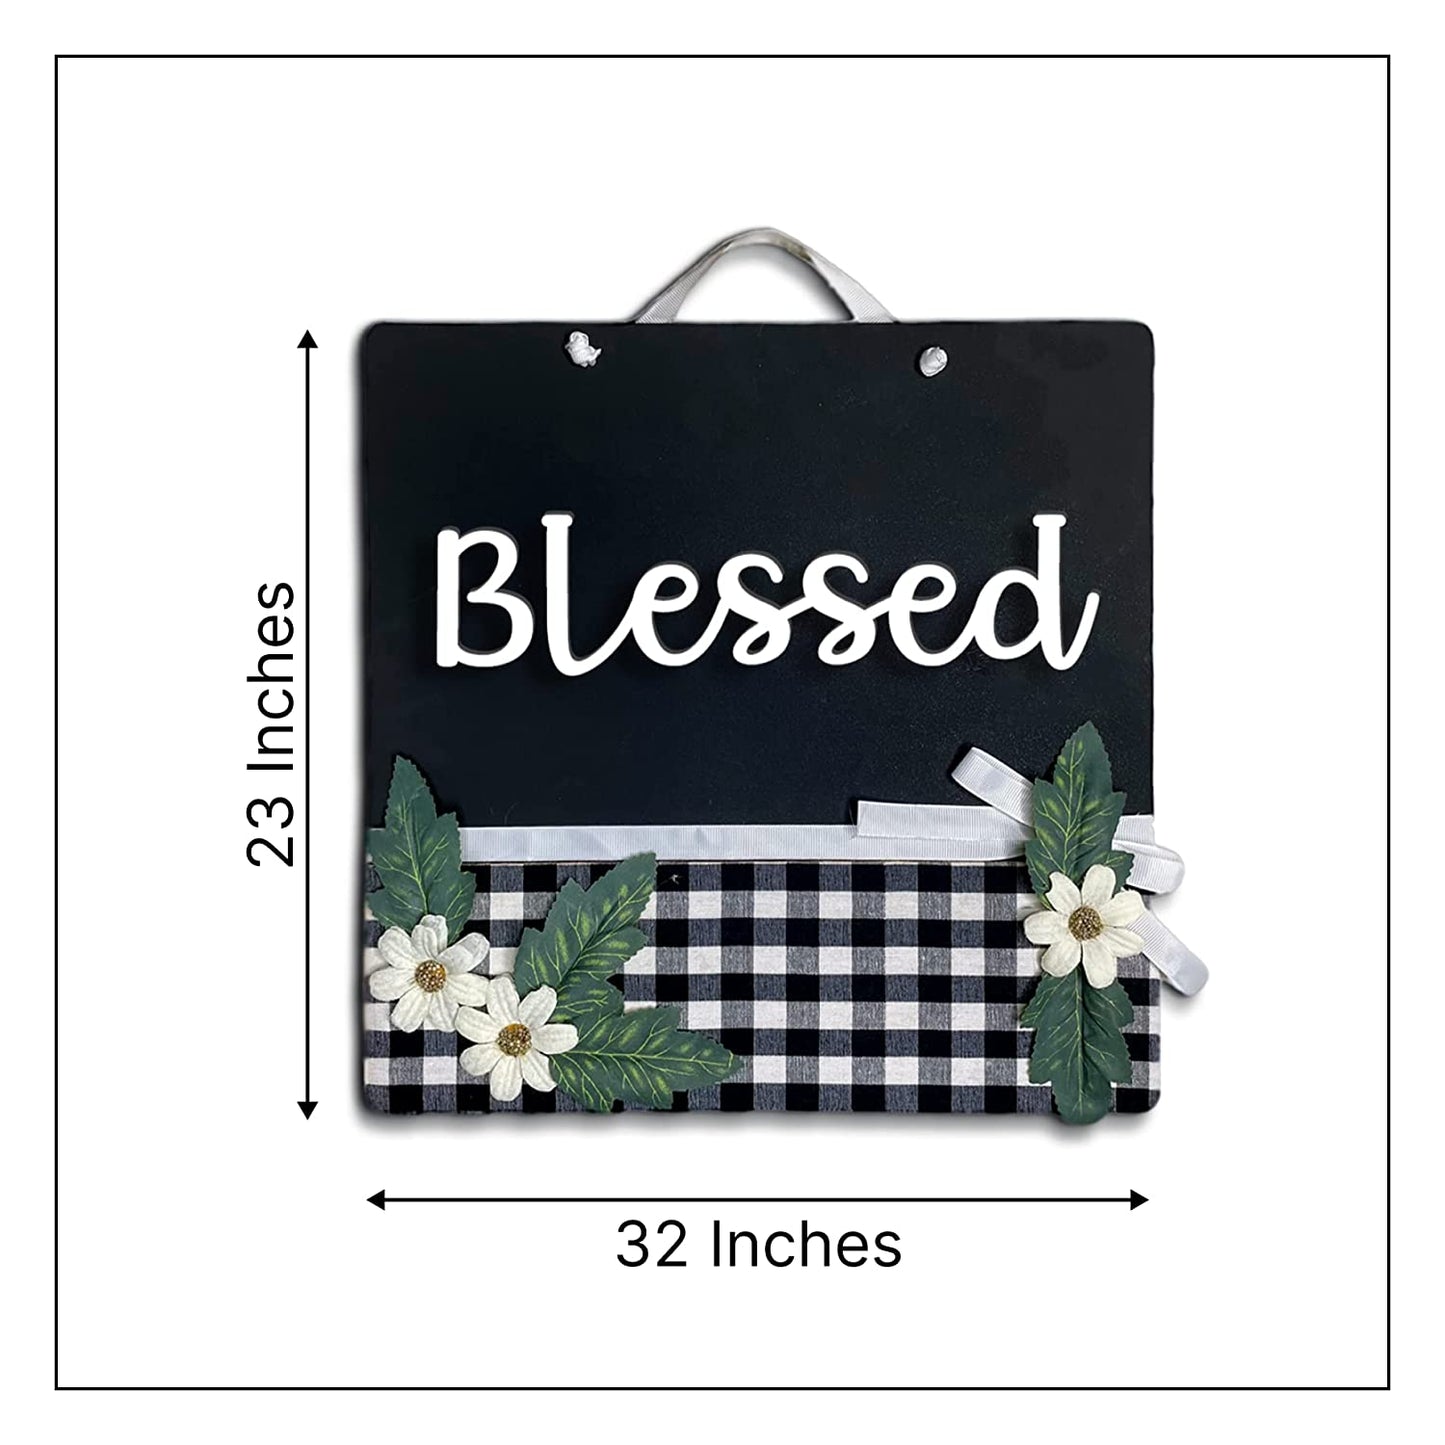 Blessed Wall Decor Wooden Hanging Wall Art